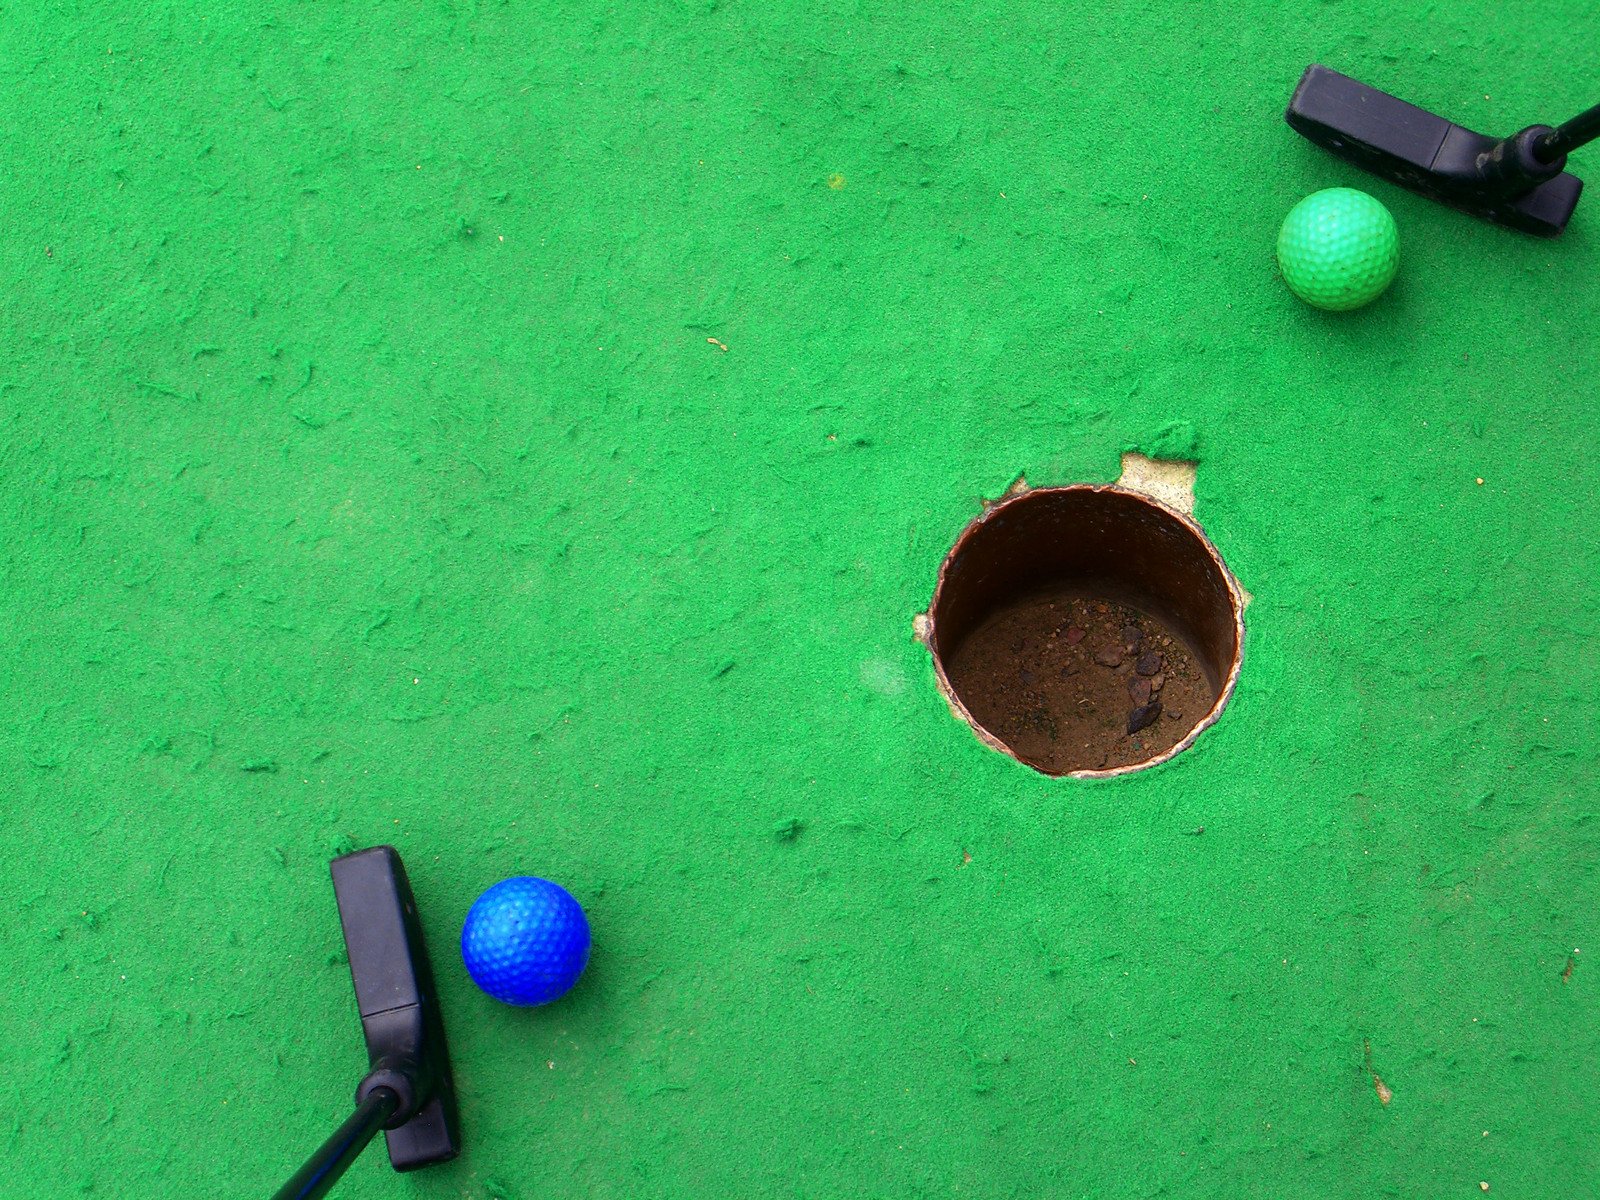 two golf balls next to a hole in the green ground